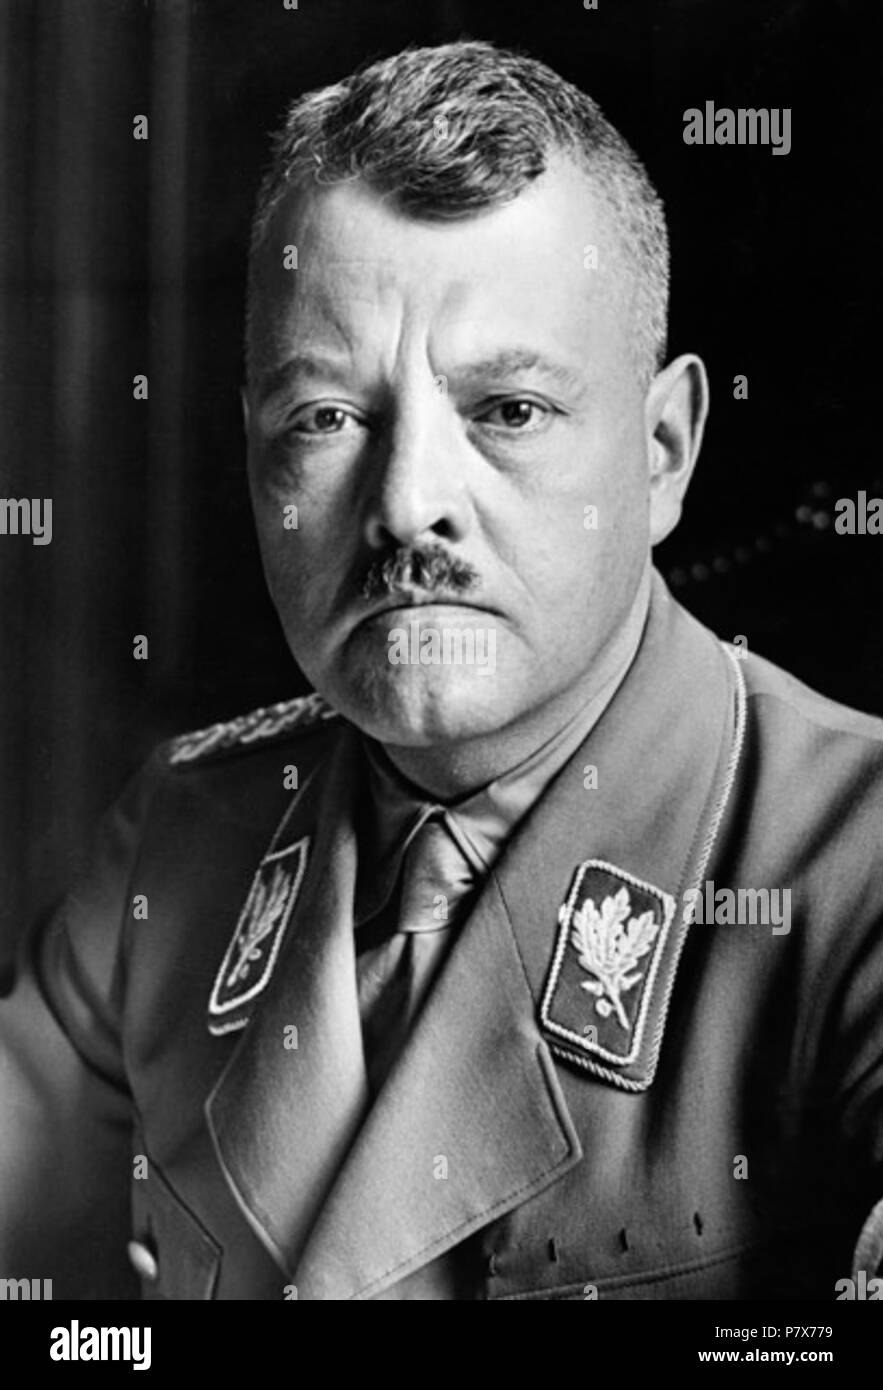 English: Georg von Detten (1887-1934), SA-Gruppenführer (group-leader) of Saxony, member of the Prussian State Council and Reichstag deputy, who was murdered by the SS on July 2 1934 as one of the victims of the purge known as 'Night of the Long Knives' . circa 1932 170 Georg von Detten Stock Photo